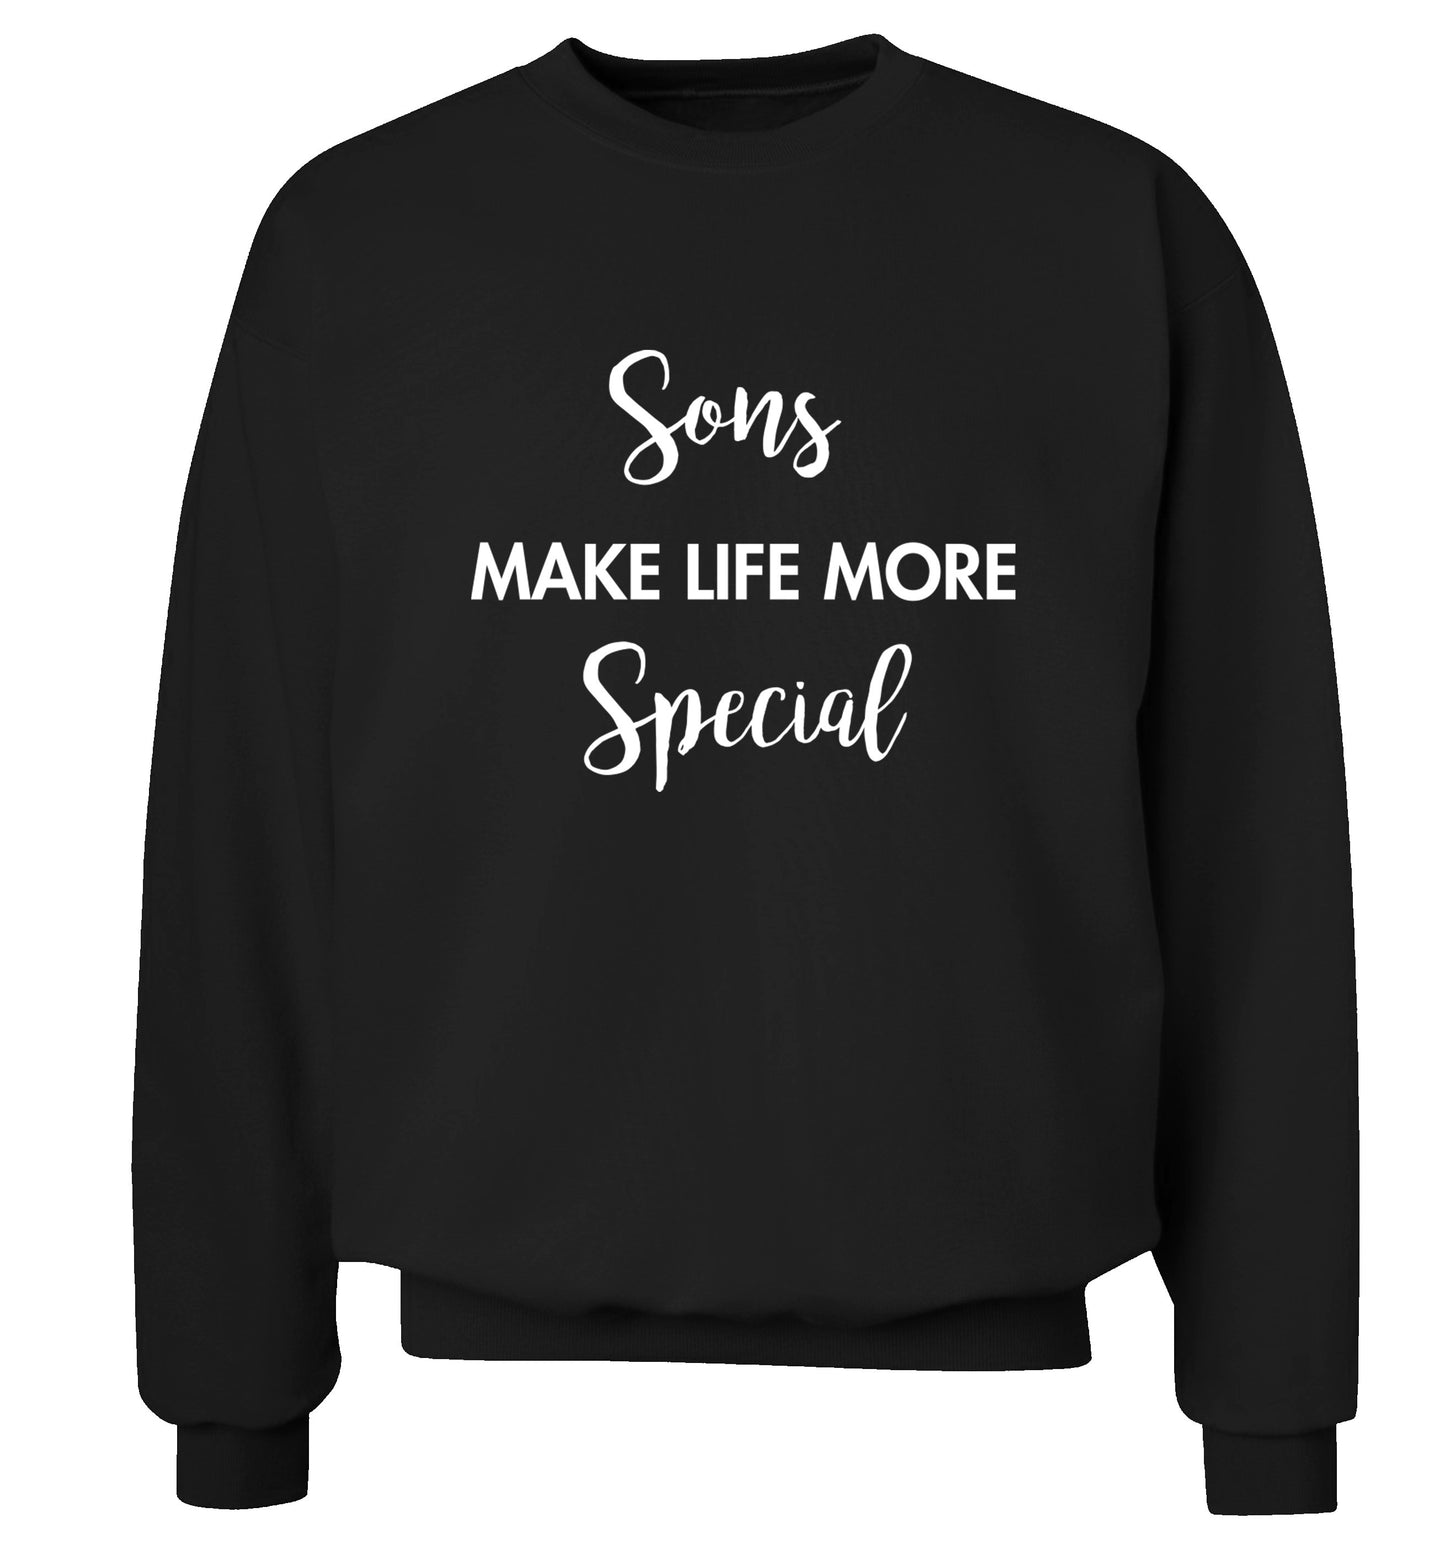 Daughters make life more special Adult's unisex black Sweater 2XL